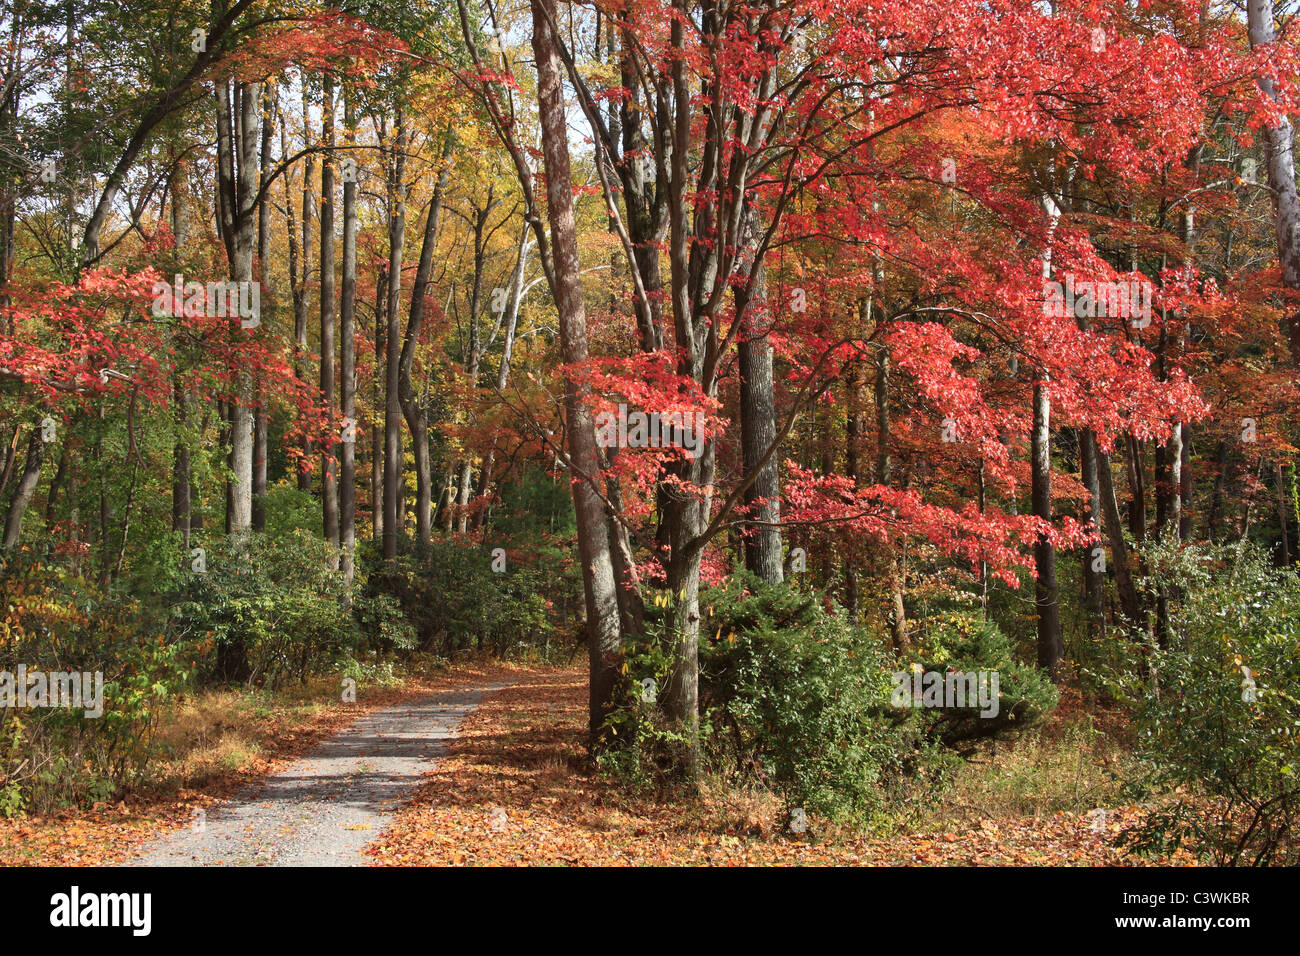 A Colorful Country Lane And Forest In Autumn, Chester County Pennsylvania, USA Stock Photo